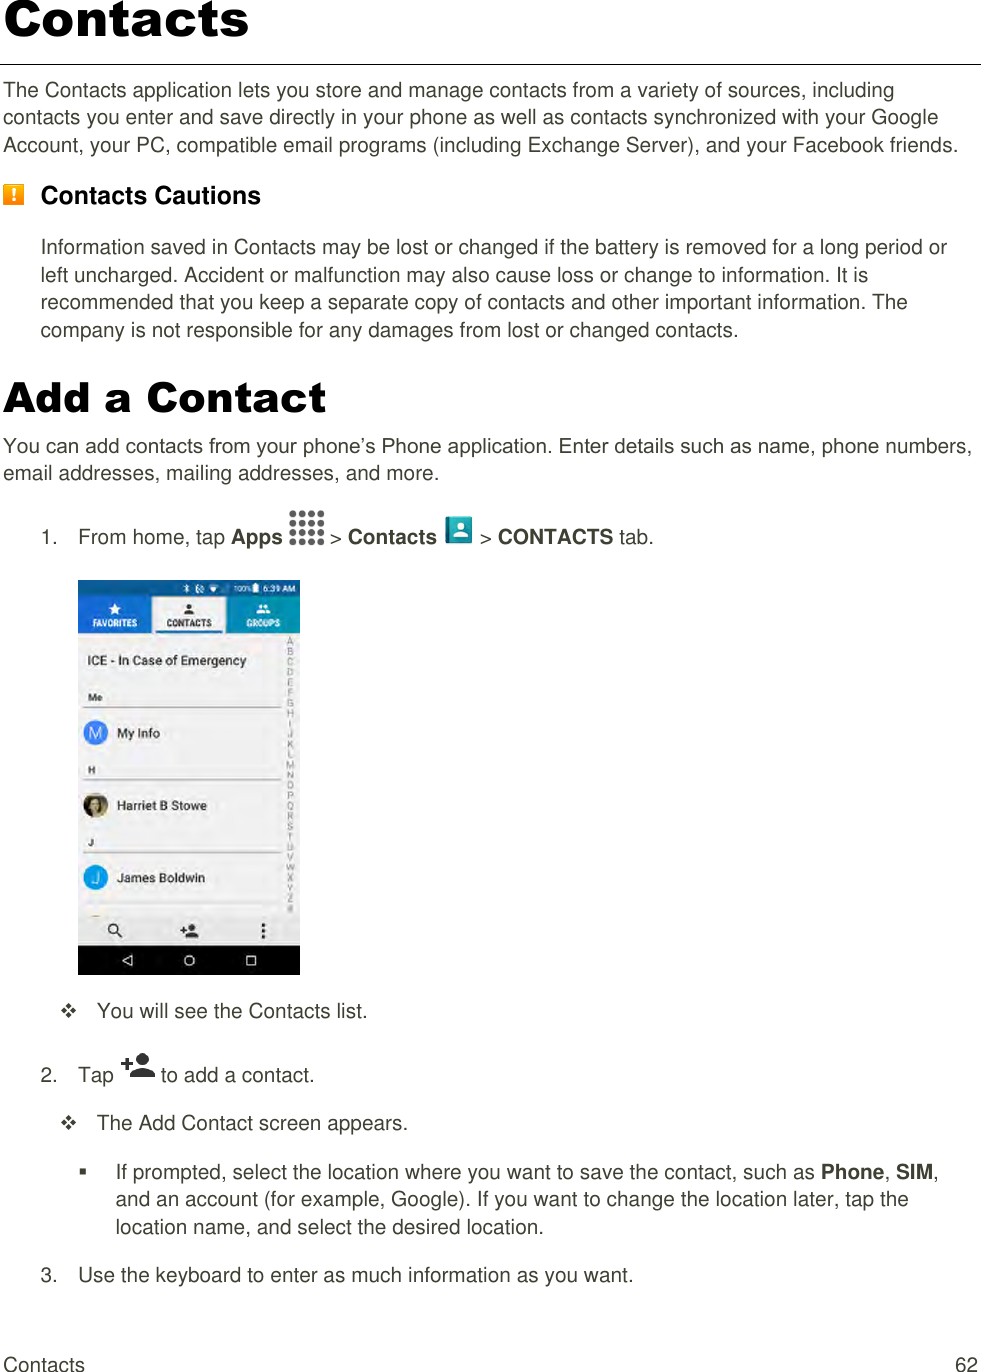 Contacts  62 Contacts The Contacts application lets you store and manage contacts from a variety of sources, including contacts you enter and save directly in your phone as well as contacts synchronized with your Google Account, your PC, compatible email programs (including Exchange Server), and your Facebook friends.  Contacts Cautions Information saved in Contacts may be lost or changed if the battery is removed for a long period or left uncharged. Accident or malfunction may also cause loss or change to information. It is recommended that you keep a separate copy of contacts and other important information. The company is not responsible for any damages from lost or changed contacts. Add a Contact You can add contacts from your phone’s Phone application. Enter details such as name, phone numbers, email addresses, mailing addresses, and more. 1.  From home, tap Apps   &gt; Contacts   &gt; CONTACTS tab.     You will see the Contacts list. 2.  Tap   to add a contact.    The Add Contact screen appears.   If prompted, select the location where you want to save the contact, such as Phone, SIM, and an account (for example, Google). If you want to change the location later, tap the location name, and select the desired location. 3.  Use the keyboard to enter as much information as you want.  